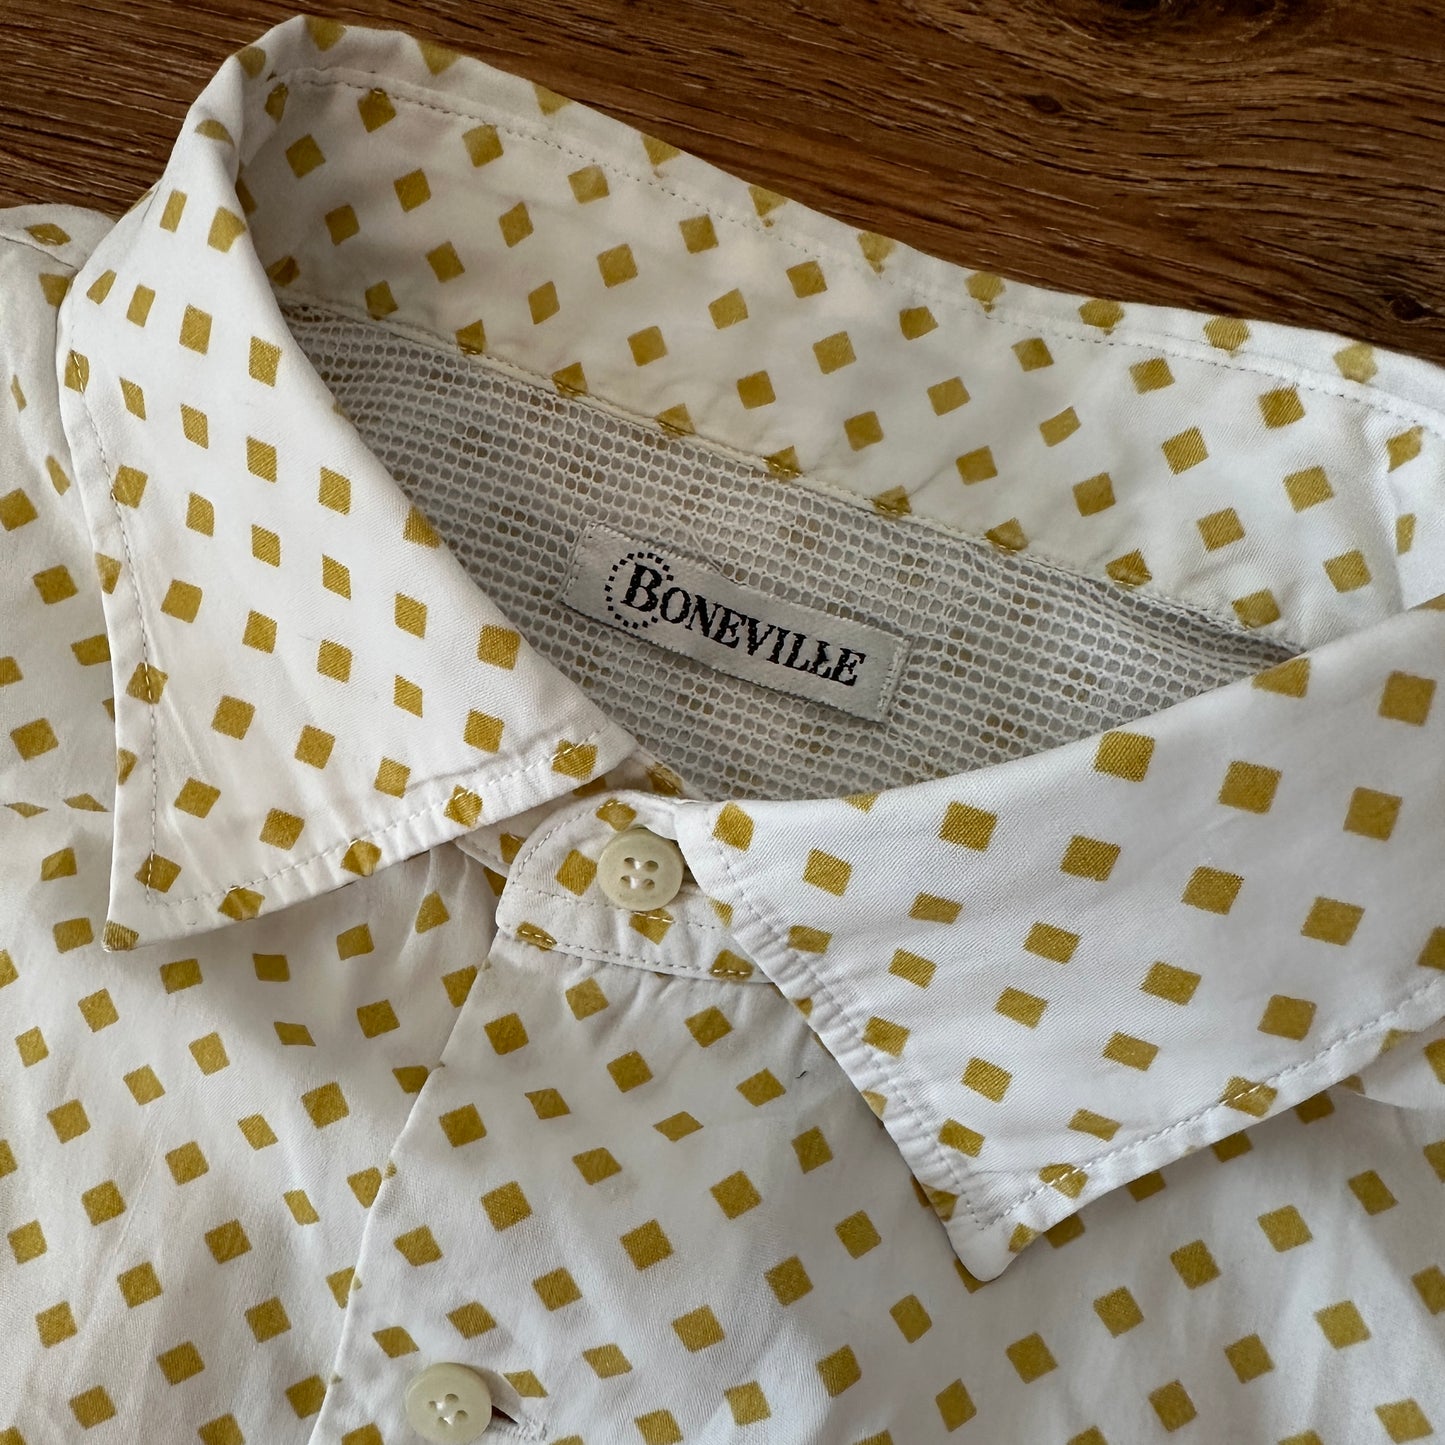 Boneville 80s Vintage Button Down Shirt - XL - Made in Italy